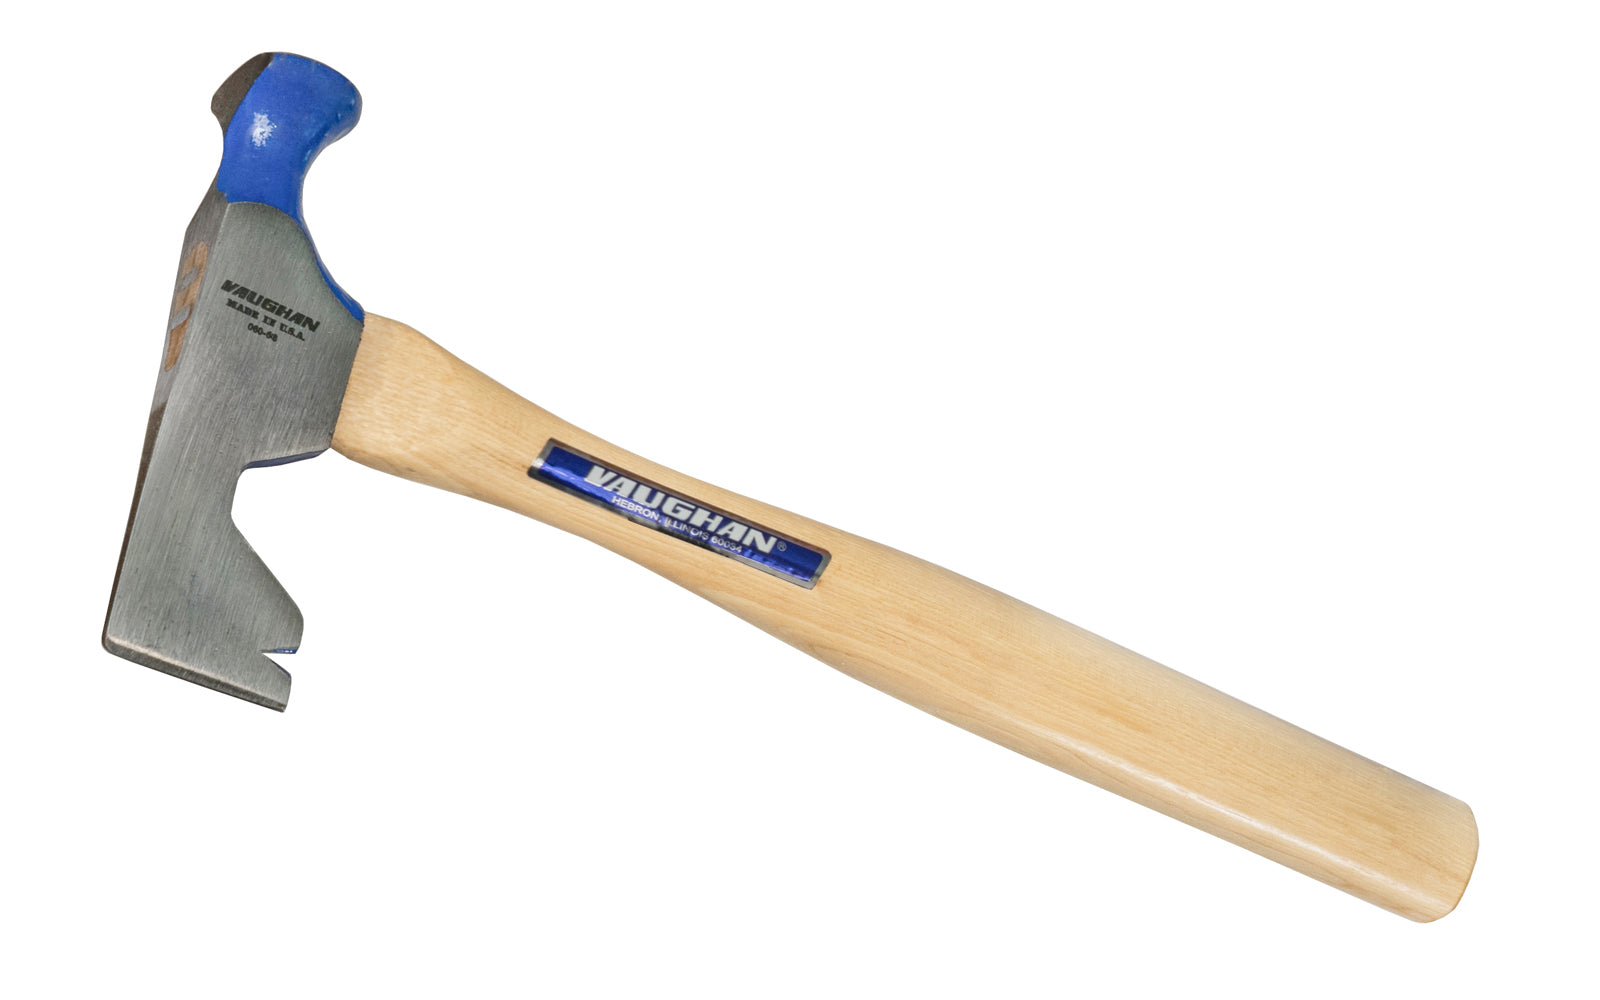 Vaughan Drywall Hatchet - 12 oz ~ WB - Made in USA ~  Model No. WB ~ 12 oz - Vaughan Drywall Hammer Hatchet ~ Flat head for nailing close to corners - Waffle-face on hammer head - Notch can pry nails & help carry drywall - Hickory Hardwood handle -  full polished with milled, crowned face, thin blade, 1-3/4" cutting edge